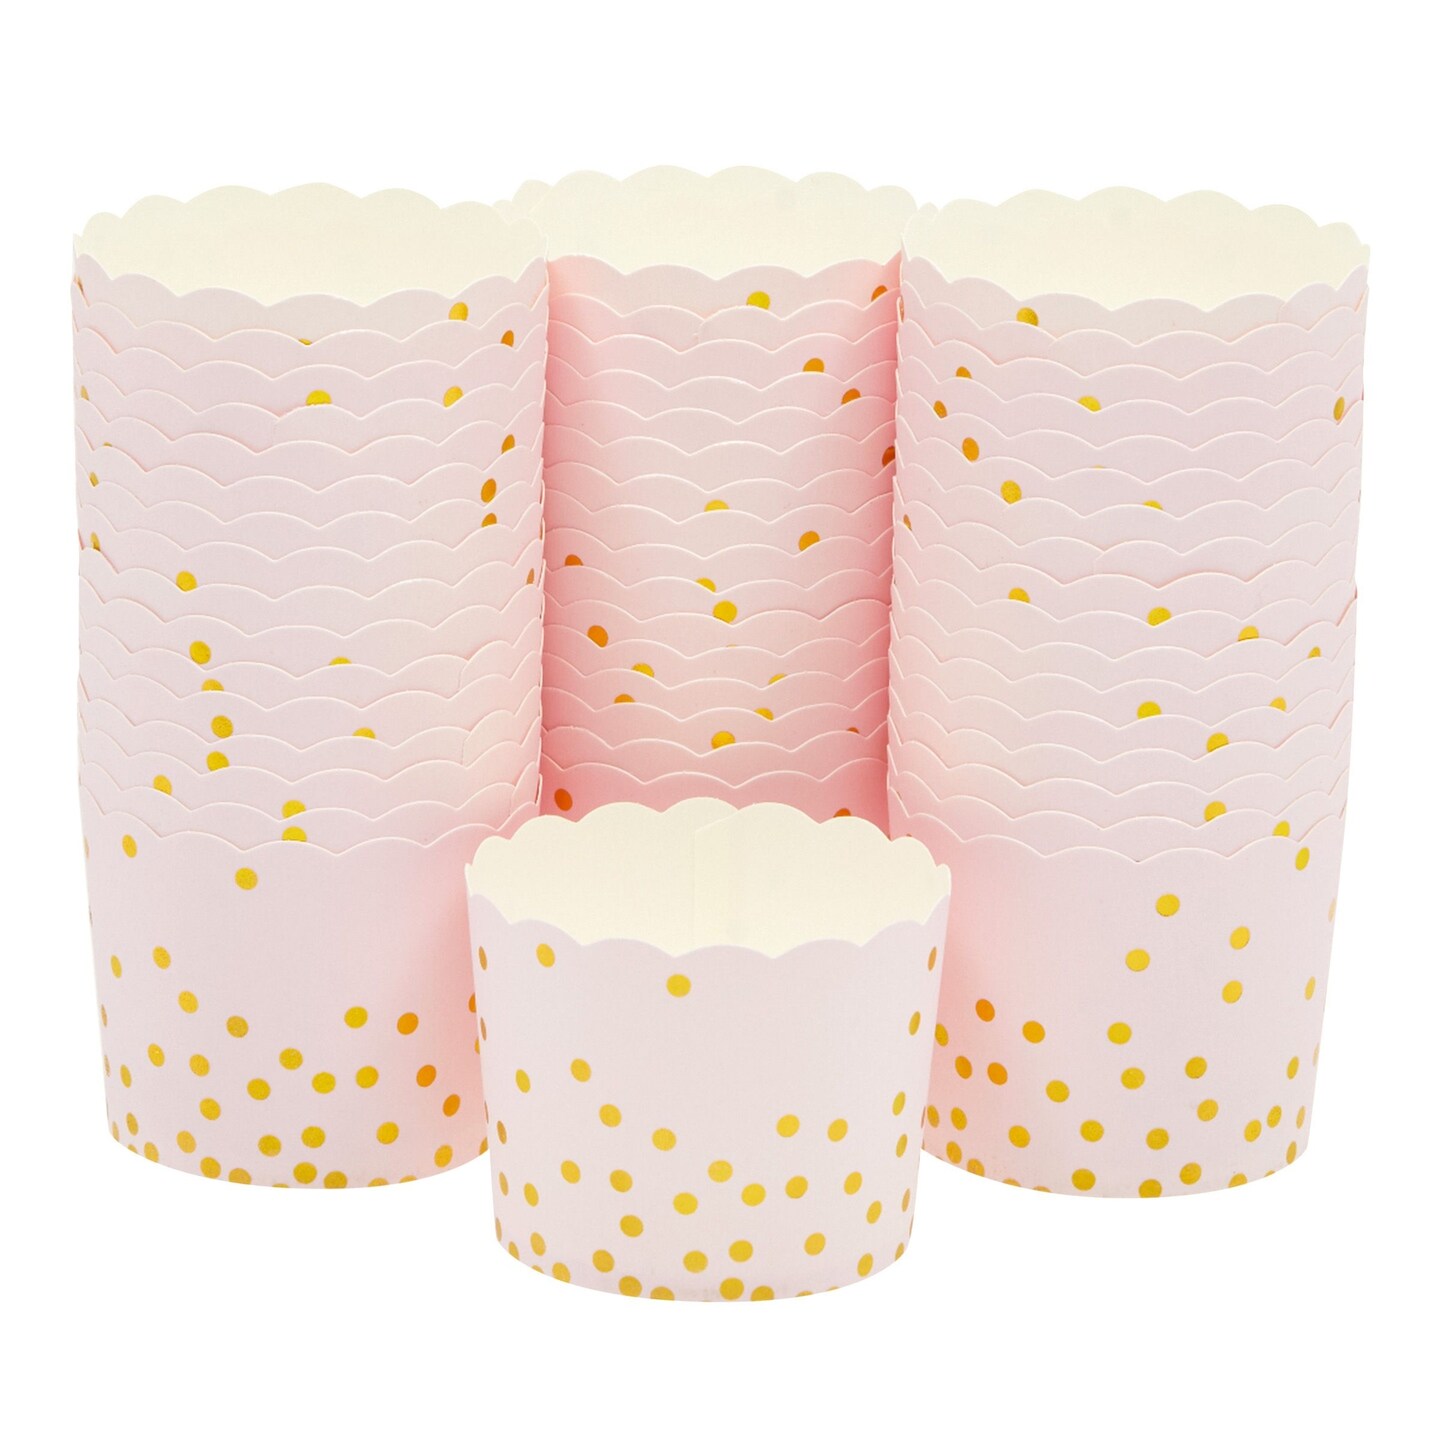 50 Pack Pink and Gold Cupcake Wrappers, Paper Baking Cups, Muffin Liners for Baby Shower, Birthday Party (2.2 In)